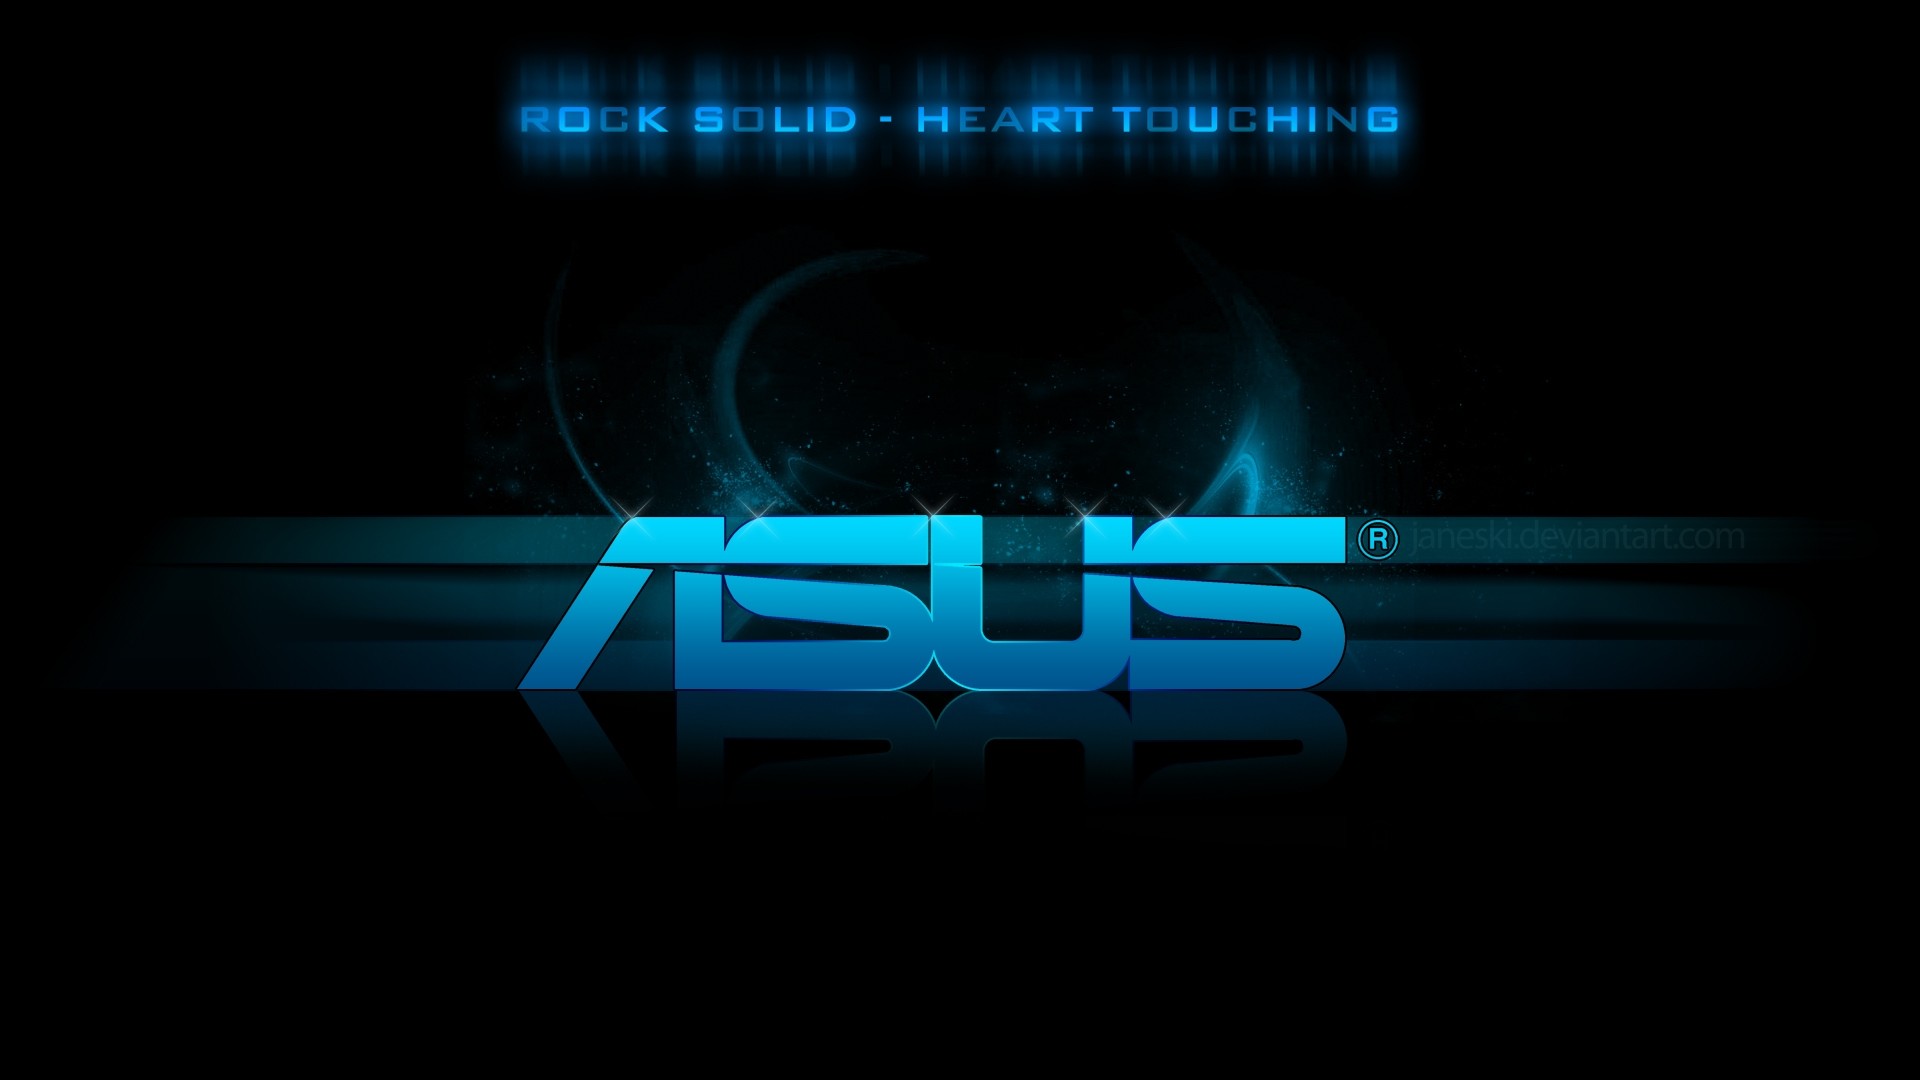 1920x1080 Download now full hd wallpaper asus logo black background in screen ...